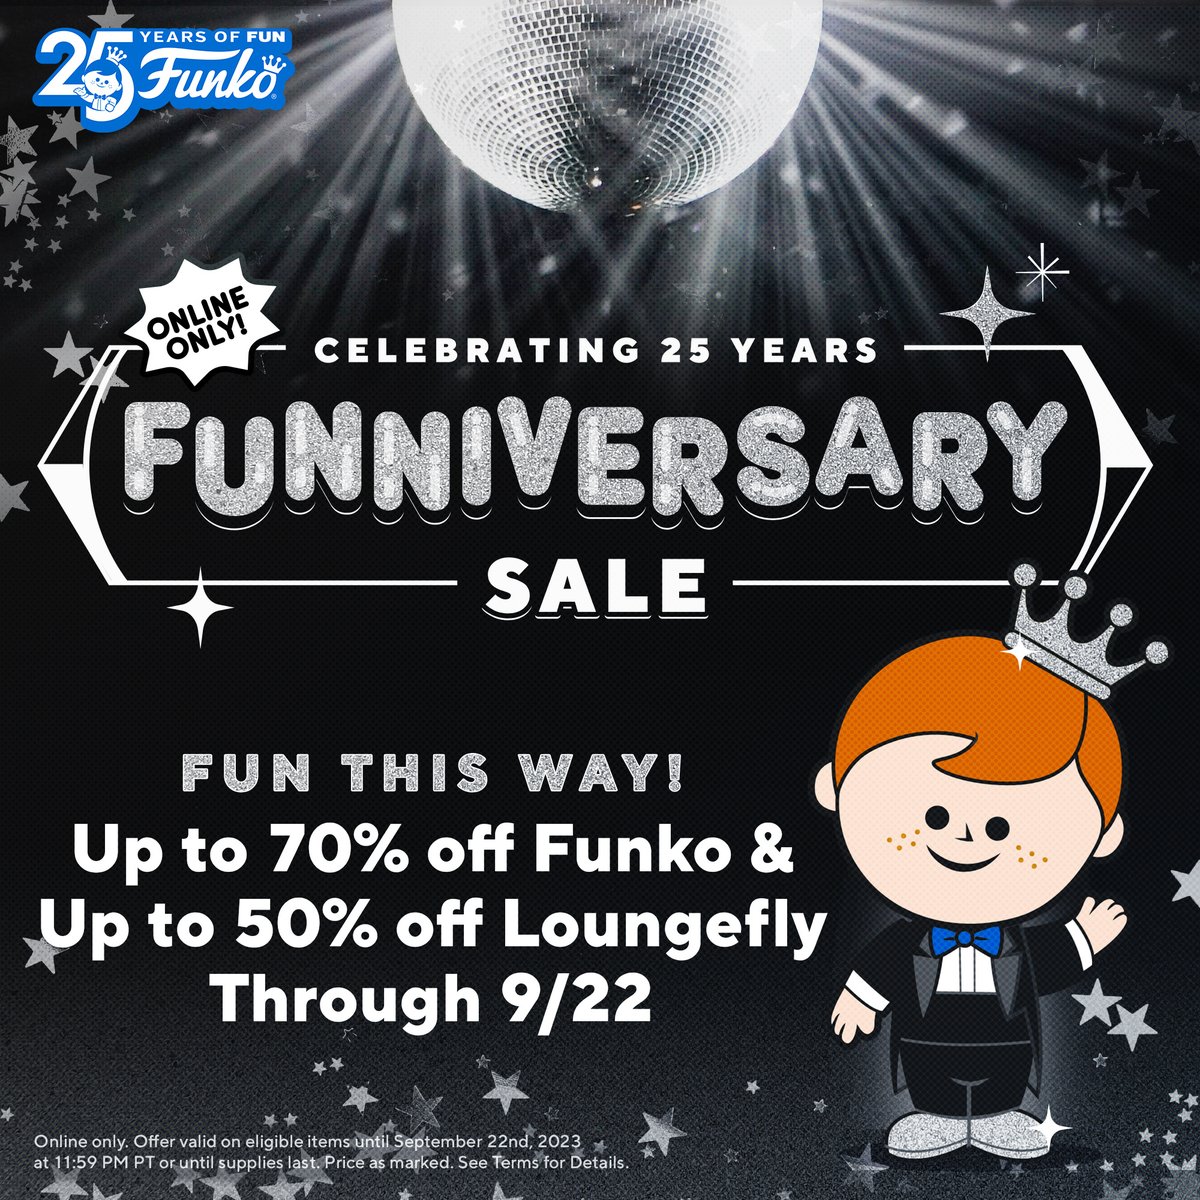 It’s officially fun o’ clock! Time for our big 25th Funniversary sale! From 9/21-9/22, enjoy up to 70% off Funko and up to 50% off Loungefly. #Funniversary #FunkoSale #Loungefly bit.ly/3sUnP3l